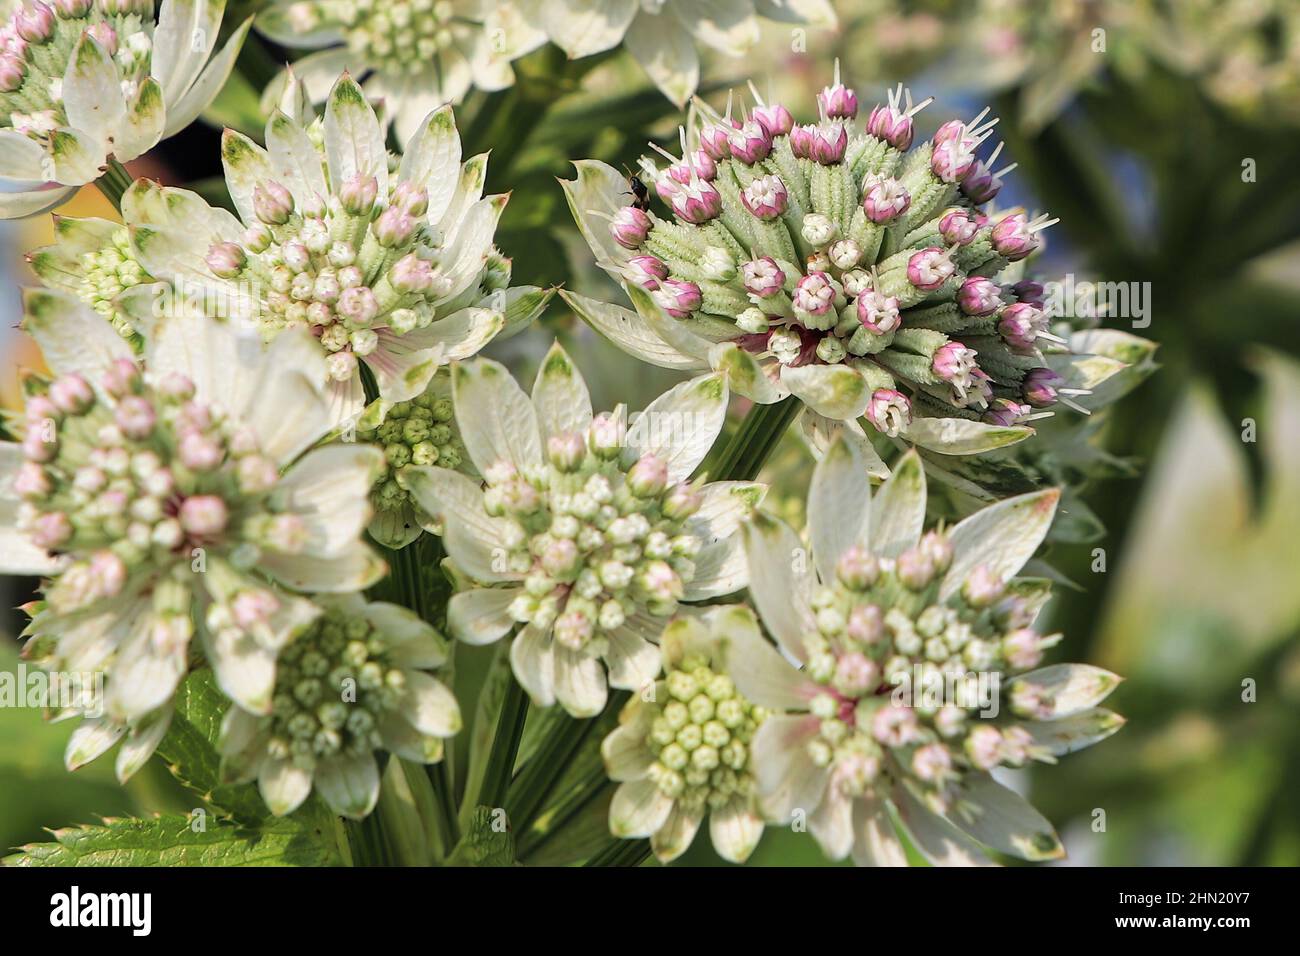 Macro view of pink and white masterwort flower clusters Stock Photo